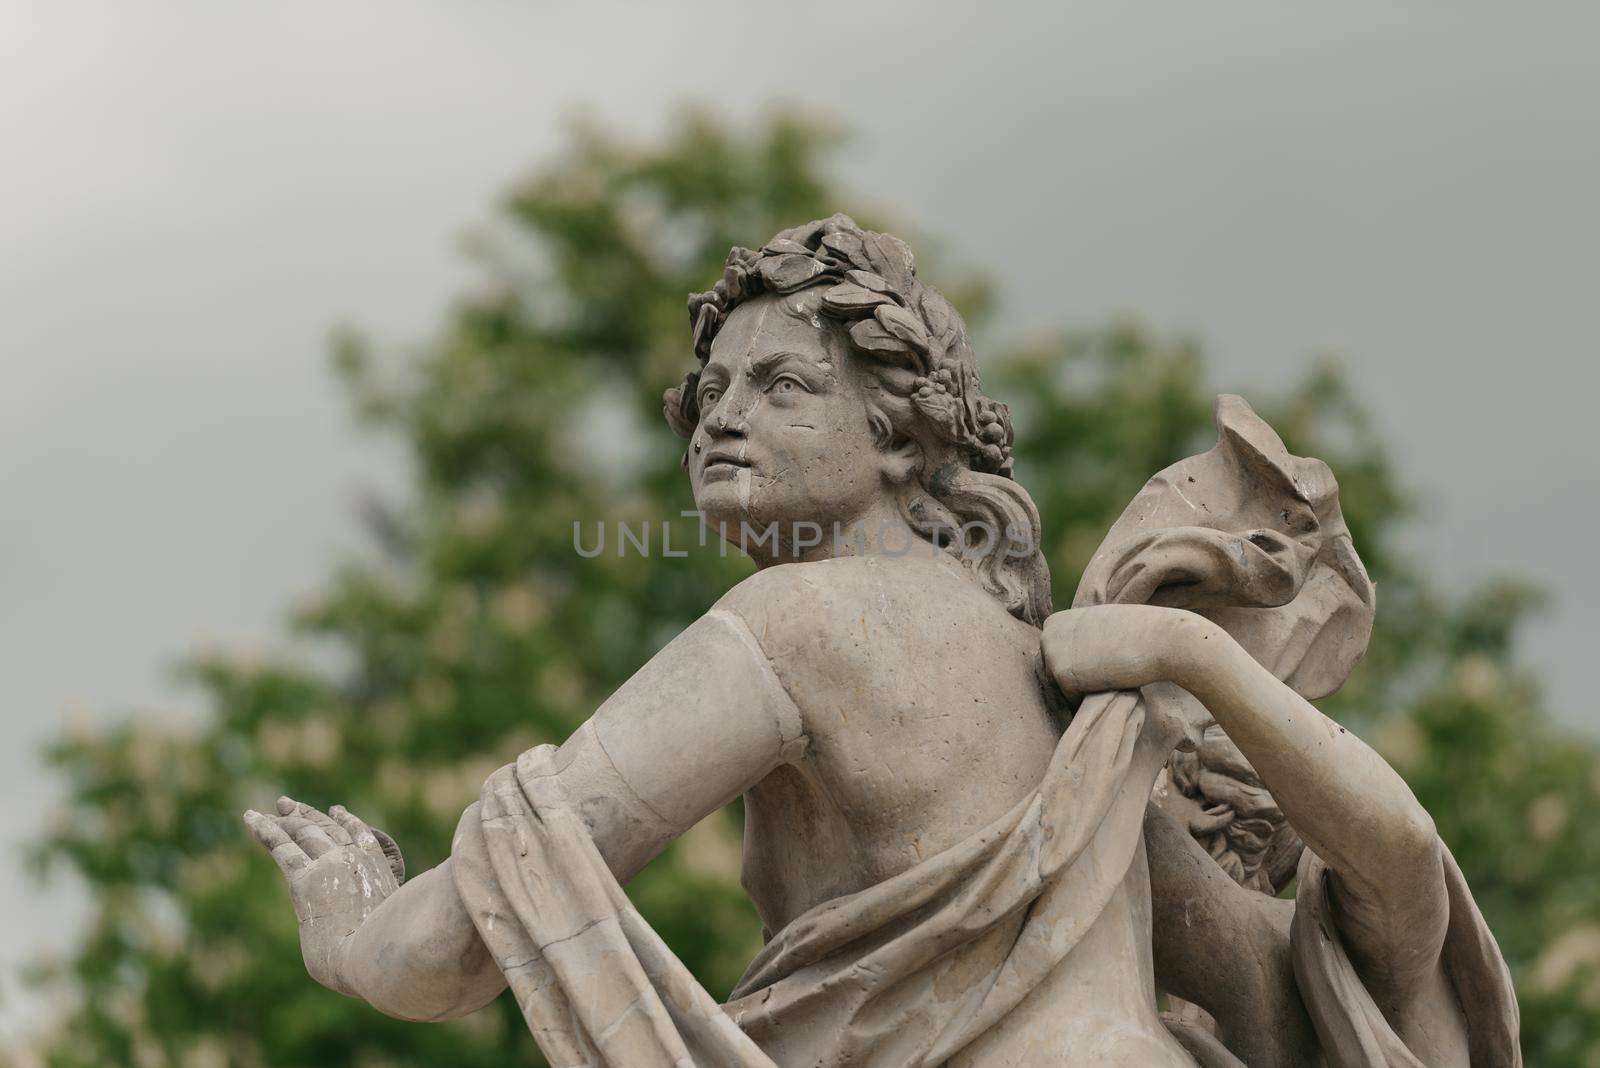 Warsaw, Poland - MAY 12, 2022: The old sculpture in Royal Baths Park, Lazienki Park